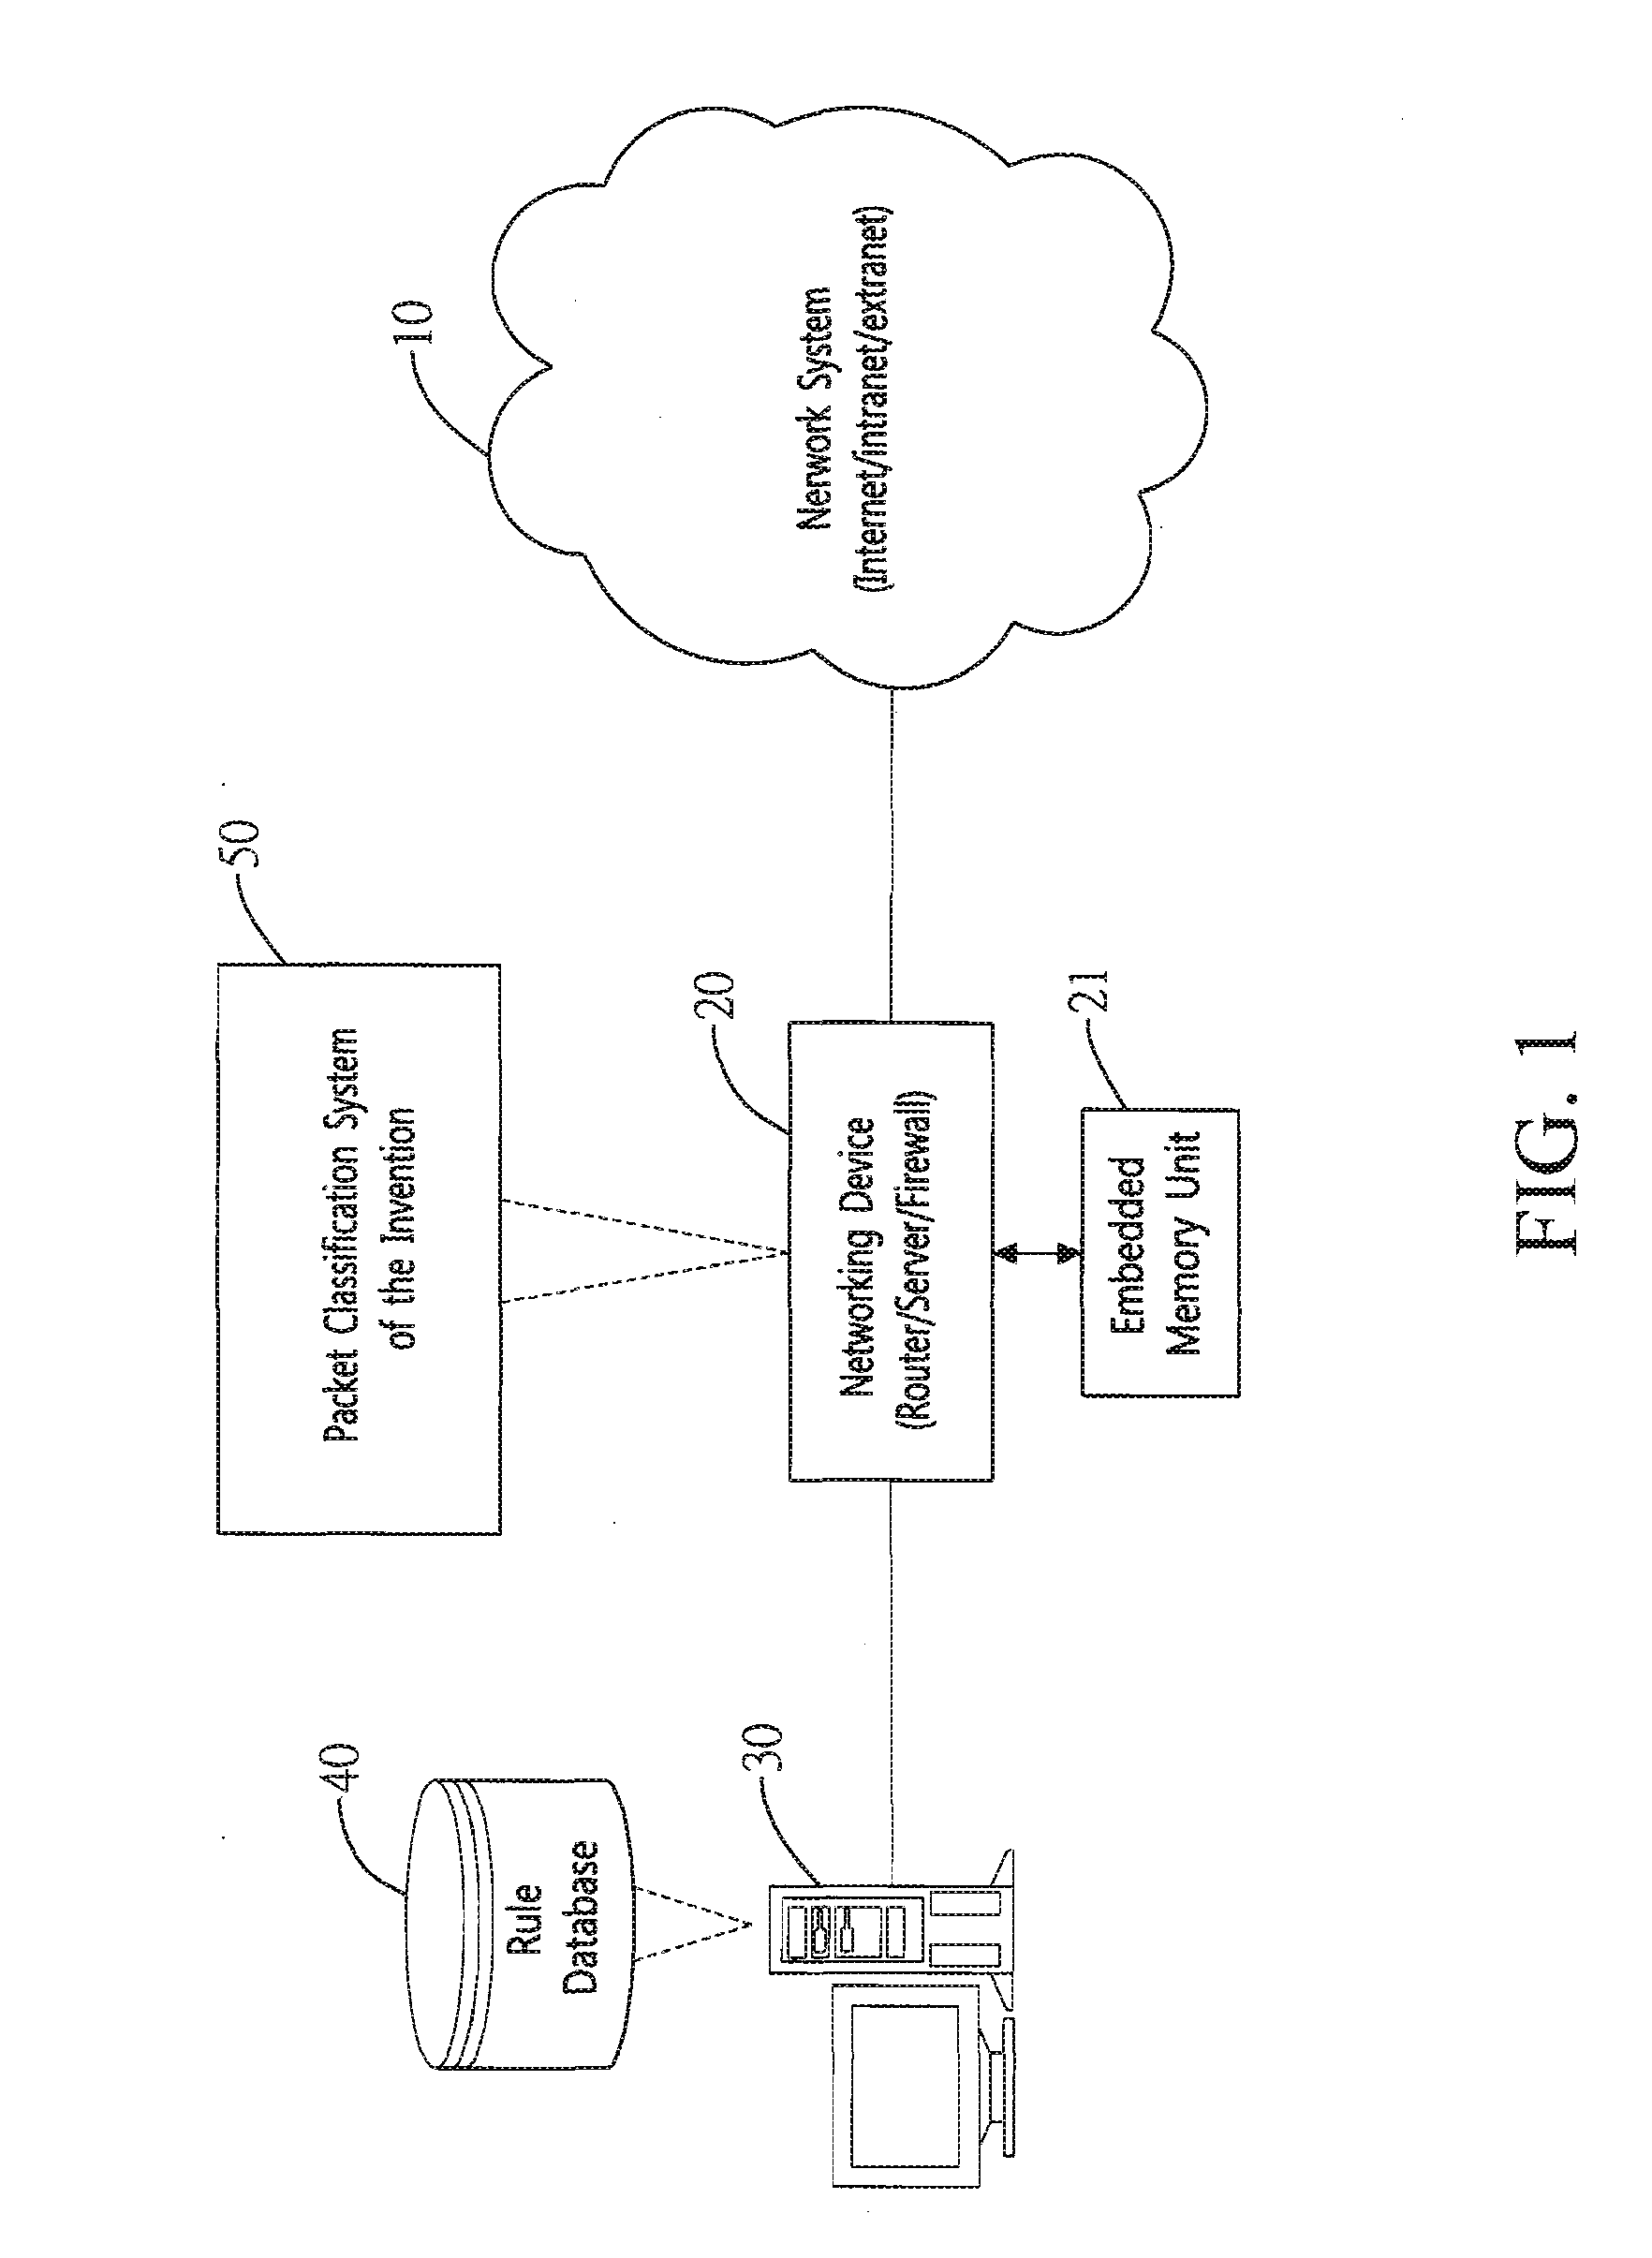 Method and system for packet classification with reduced memory space and enhanced access speed